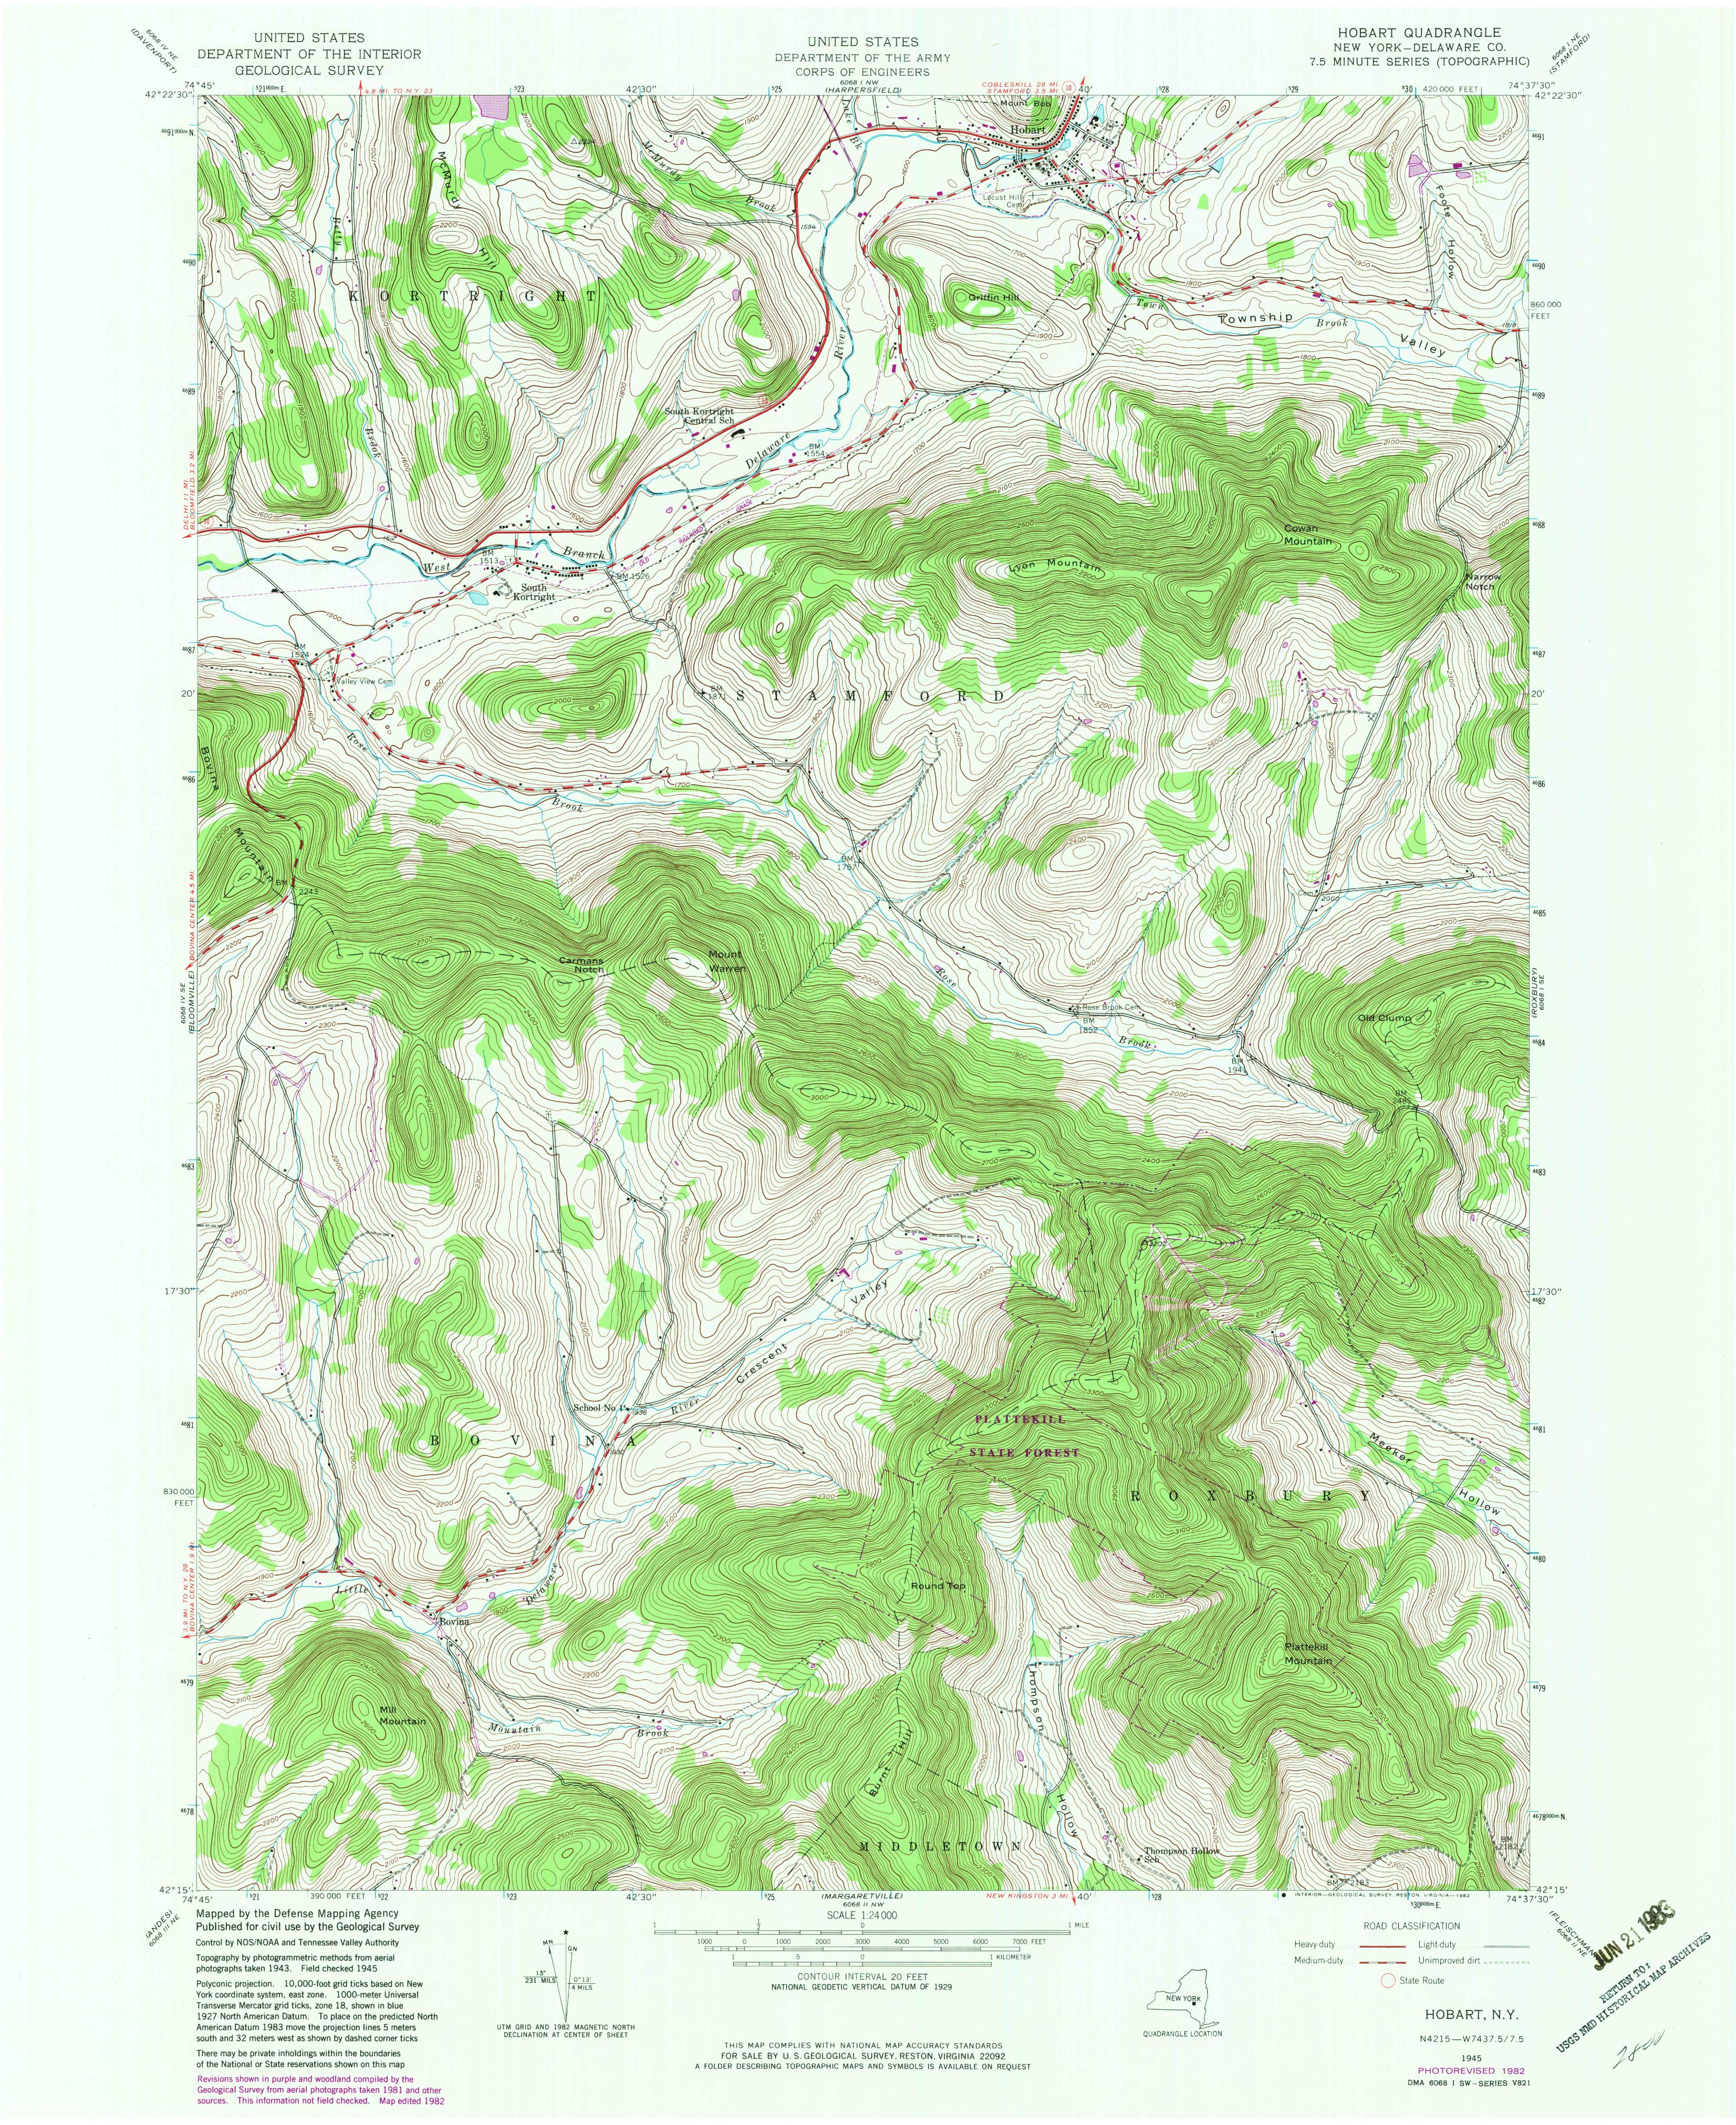 1945 USGS topographical map of Hobart